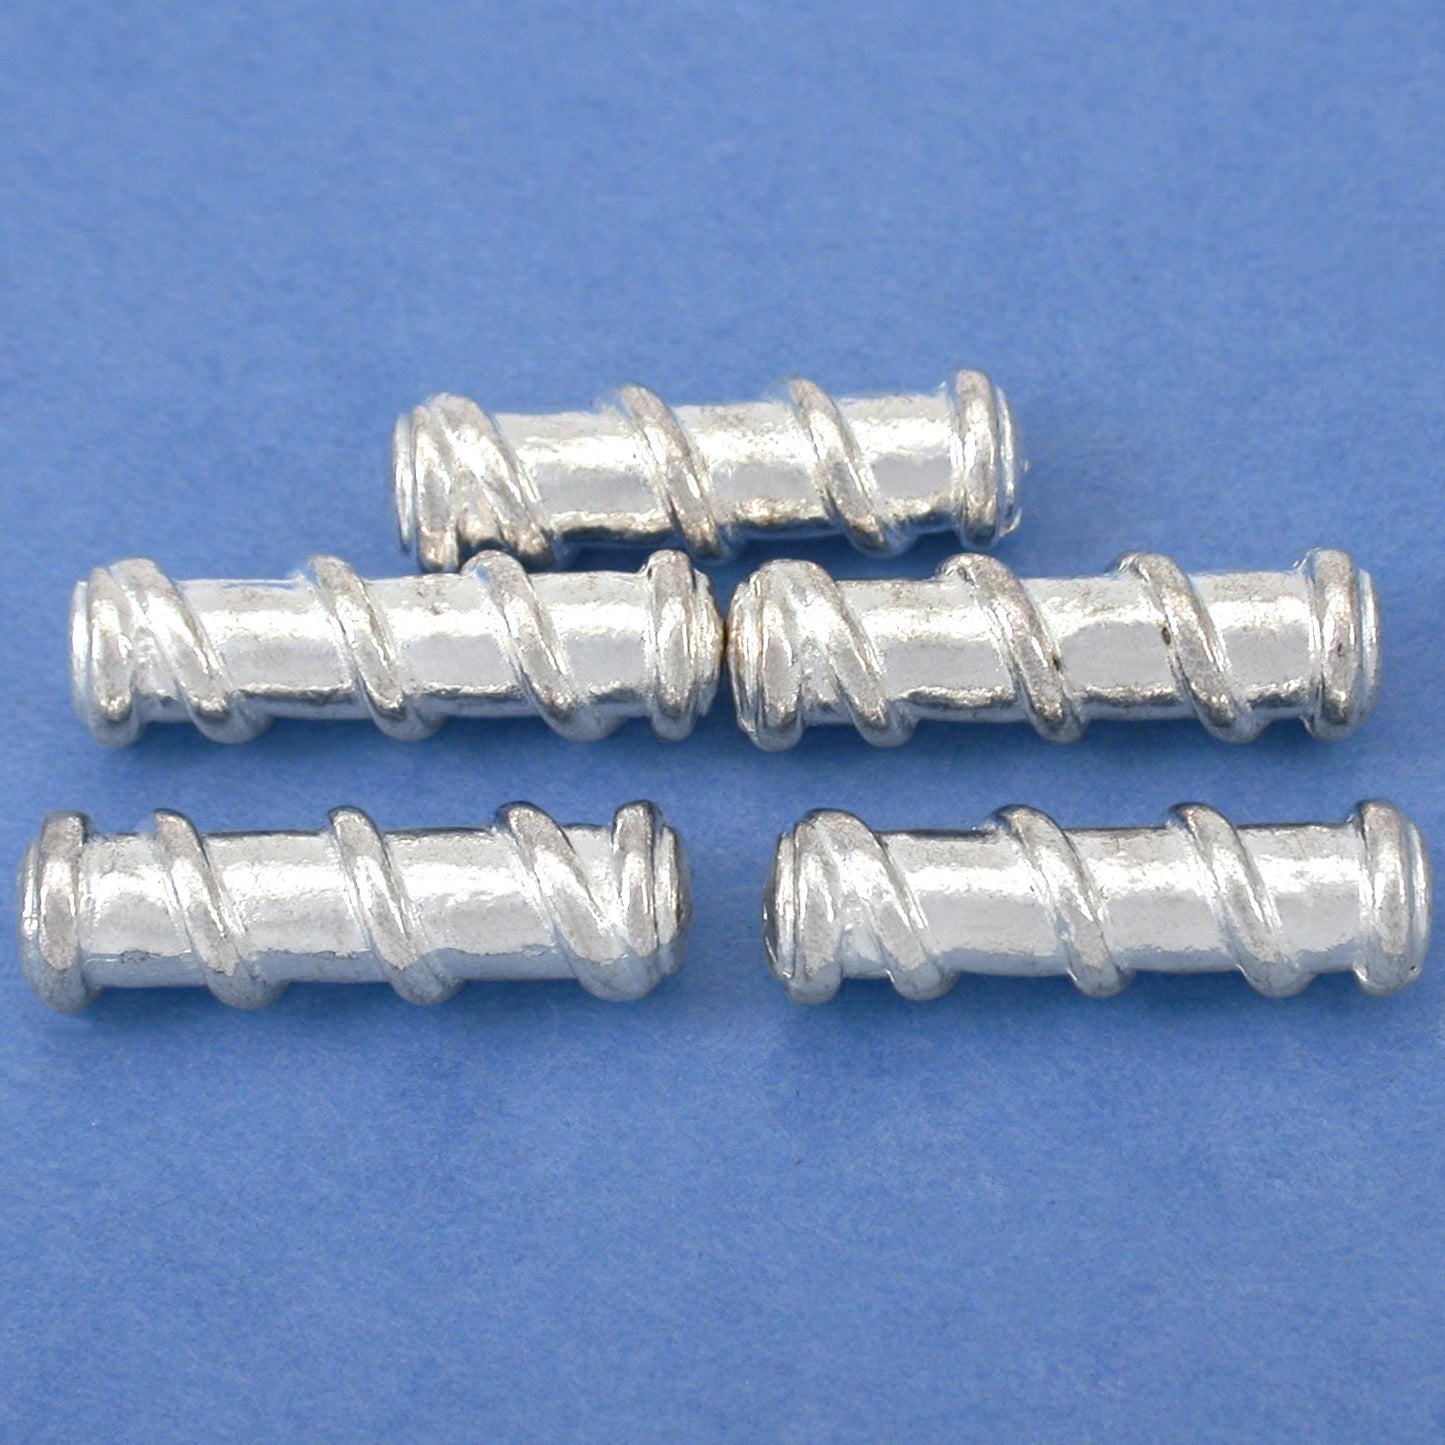 Bali Spiral Tube Silver Plated Beads 22.5mm 15 Grams 4Pcs Approx.